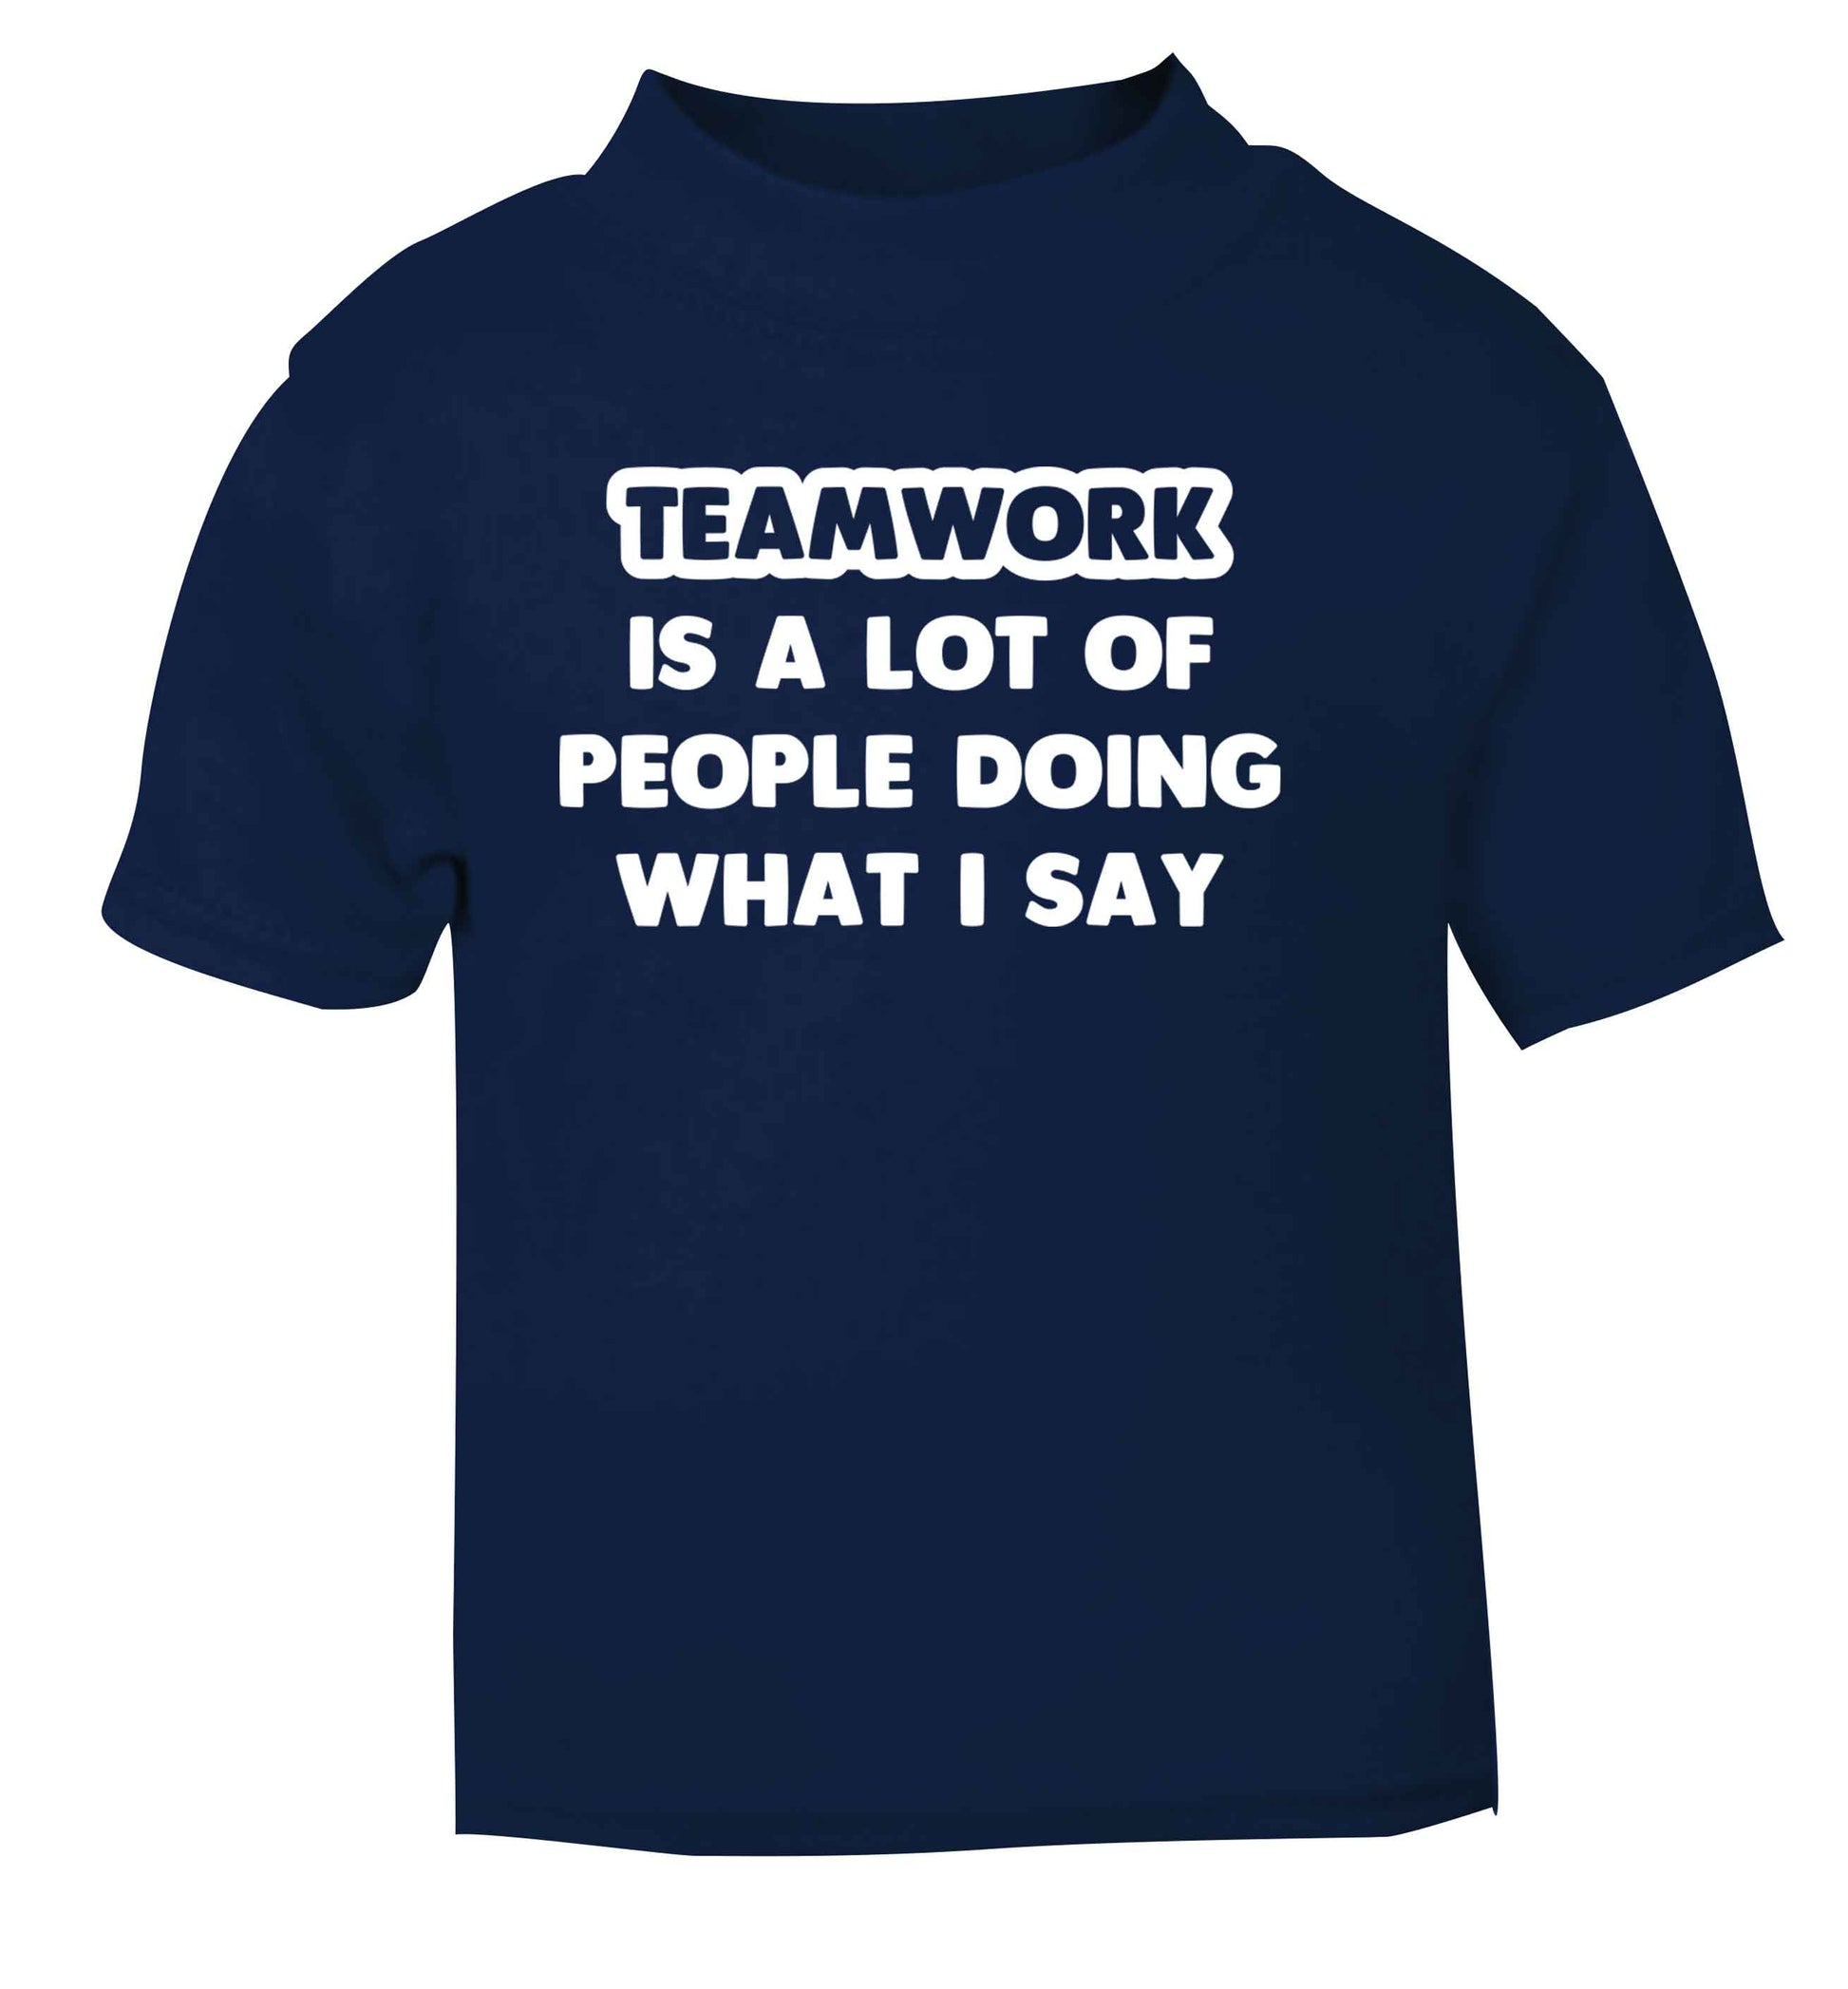 Teamwork is a lot of people doing what I say navy Baby Toddler Tshirt 2 Years